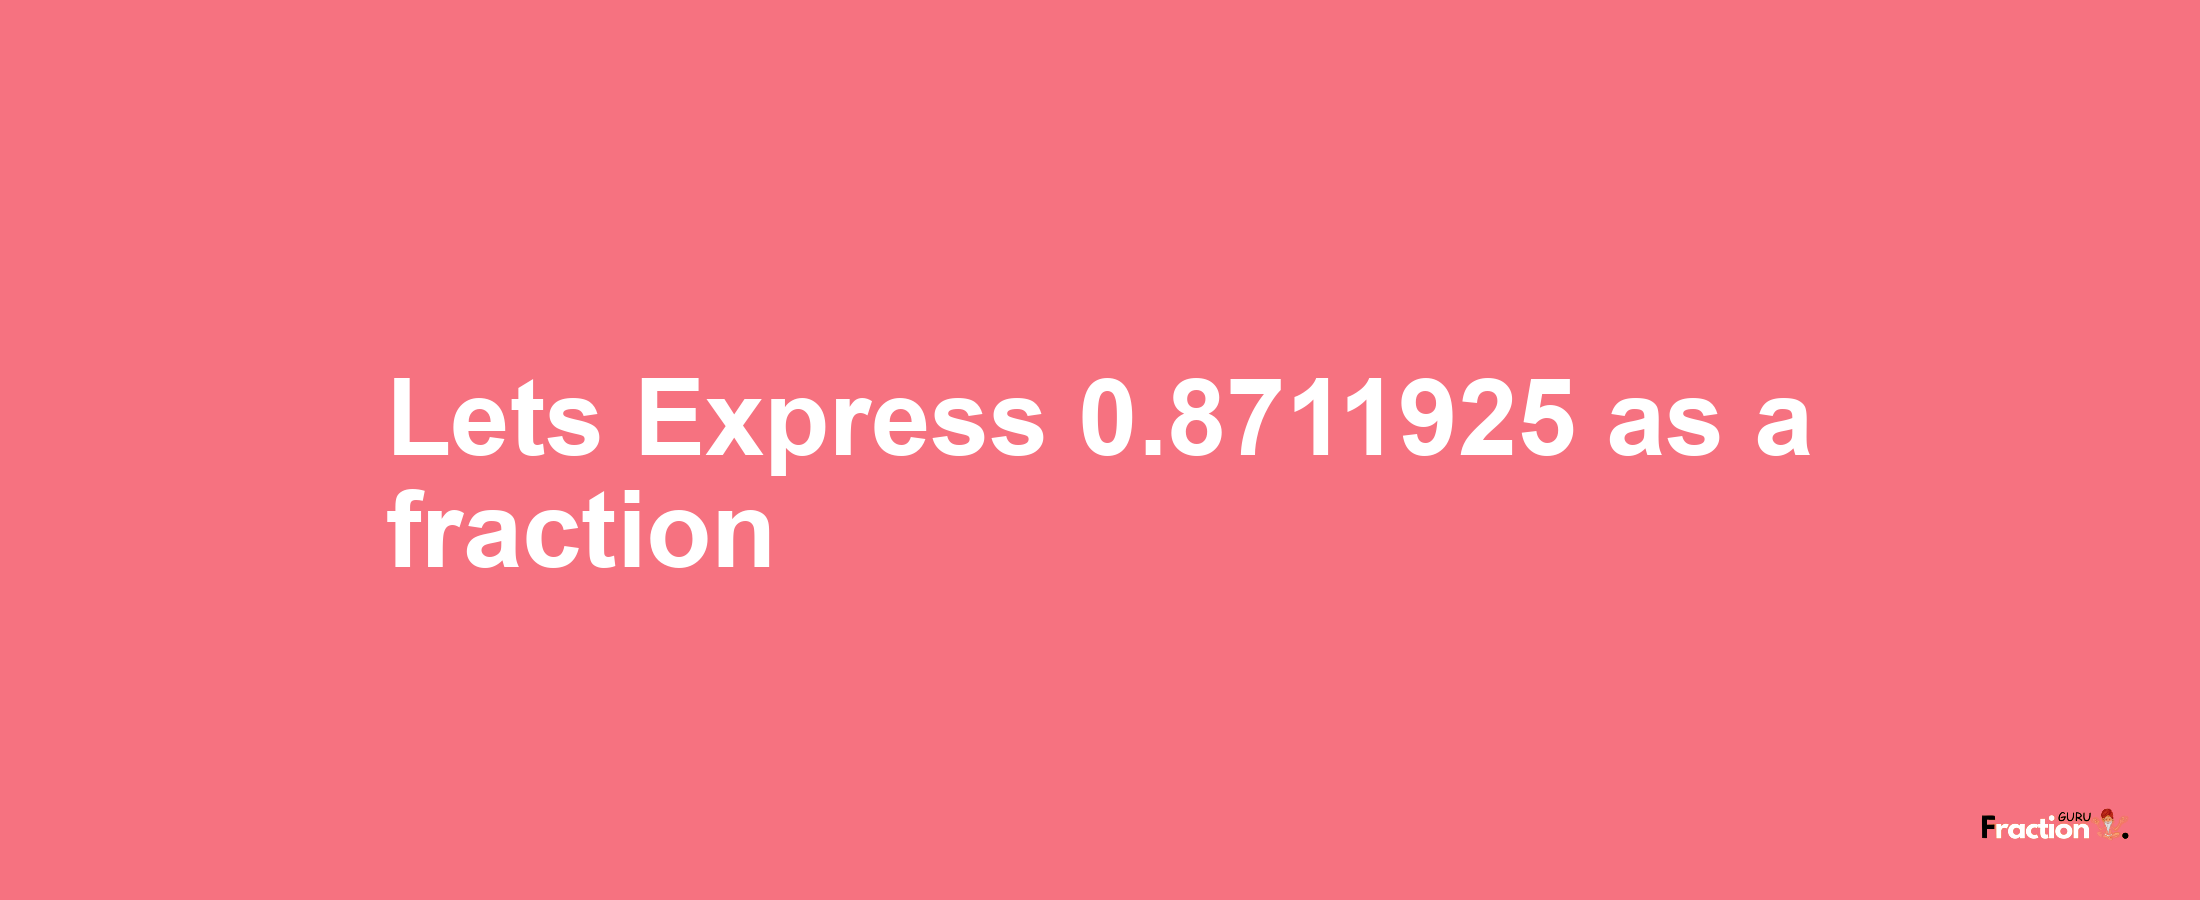 Lets Express 0.8711925 as afraction